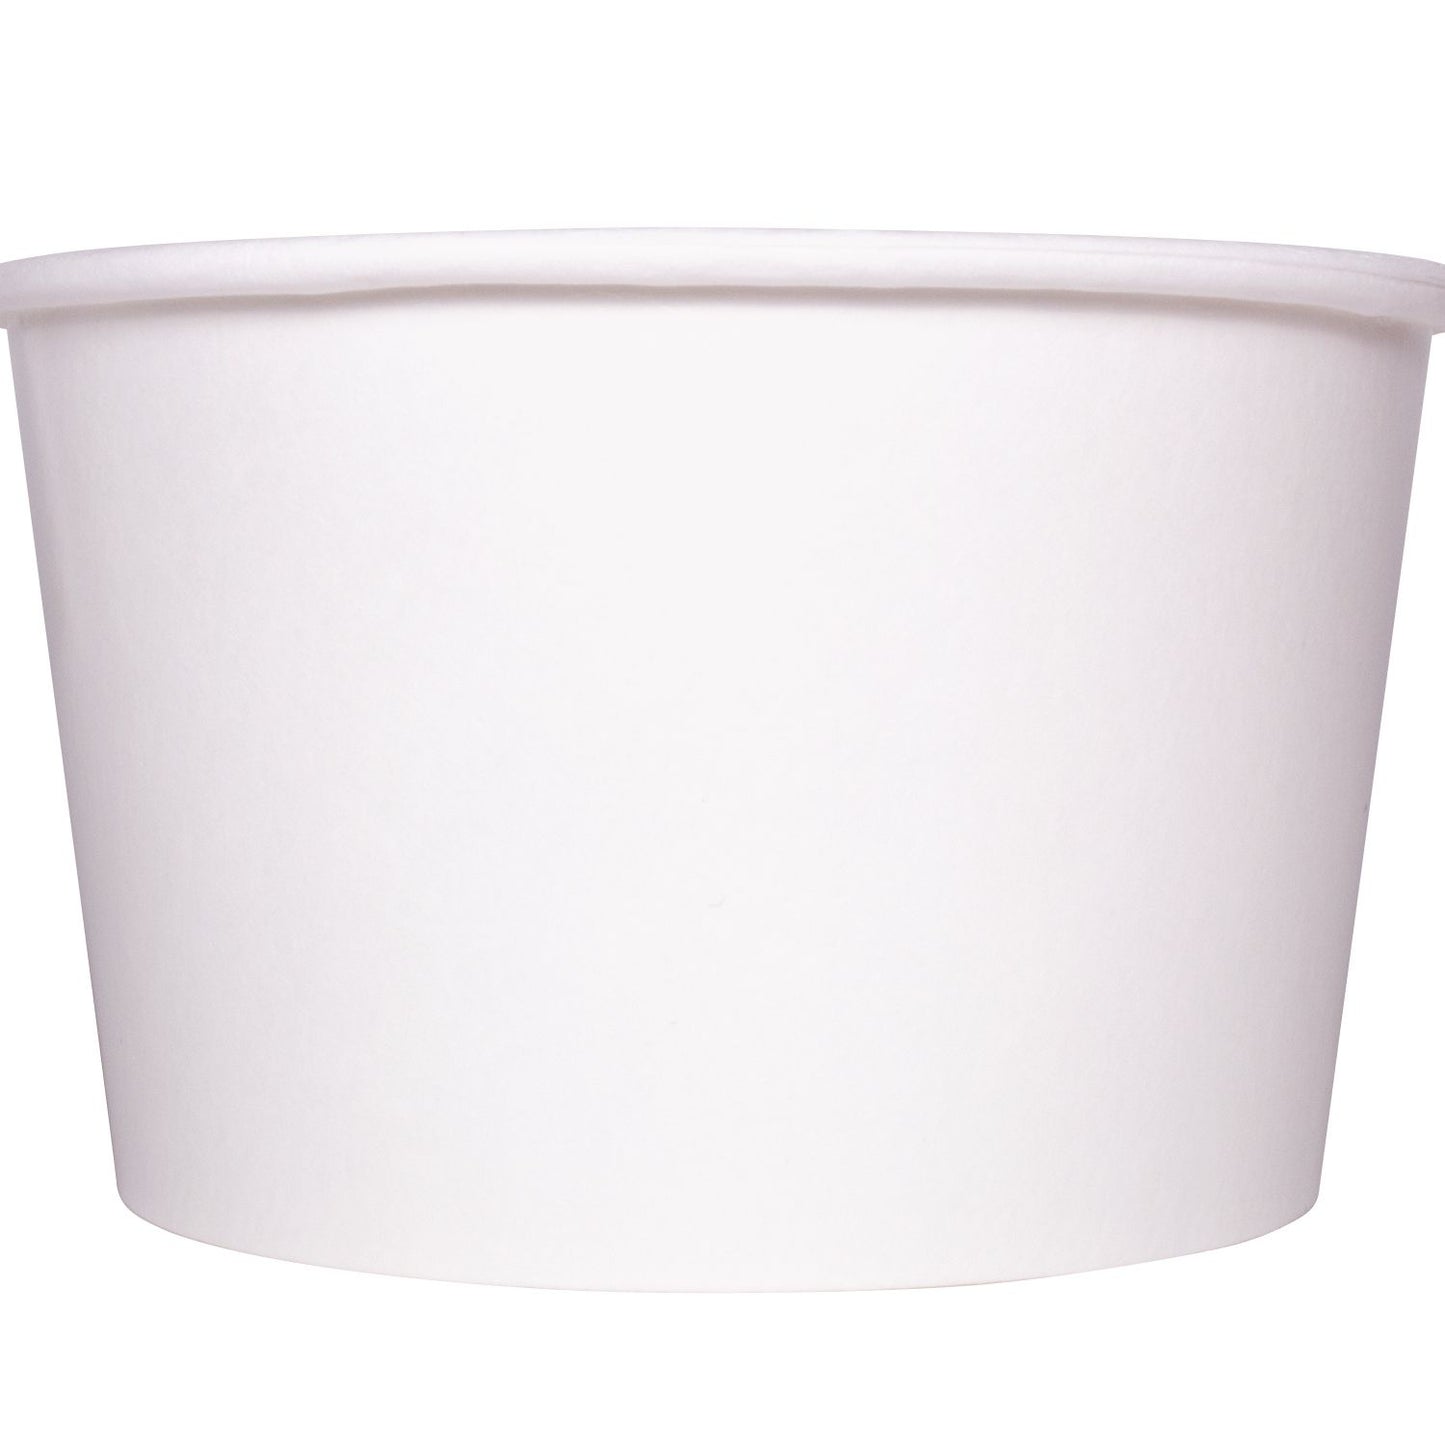 Karat 28oz Food Containers - White (142mm) - 600 ct